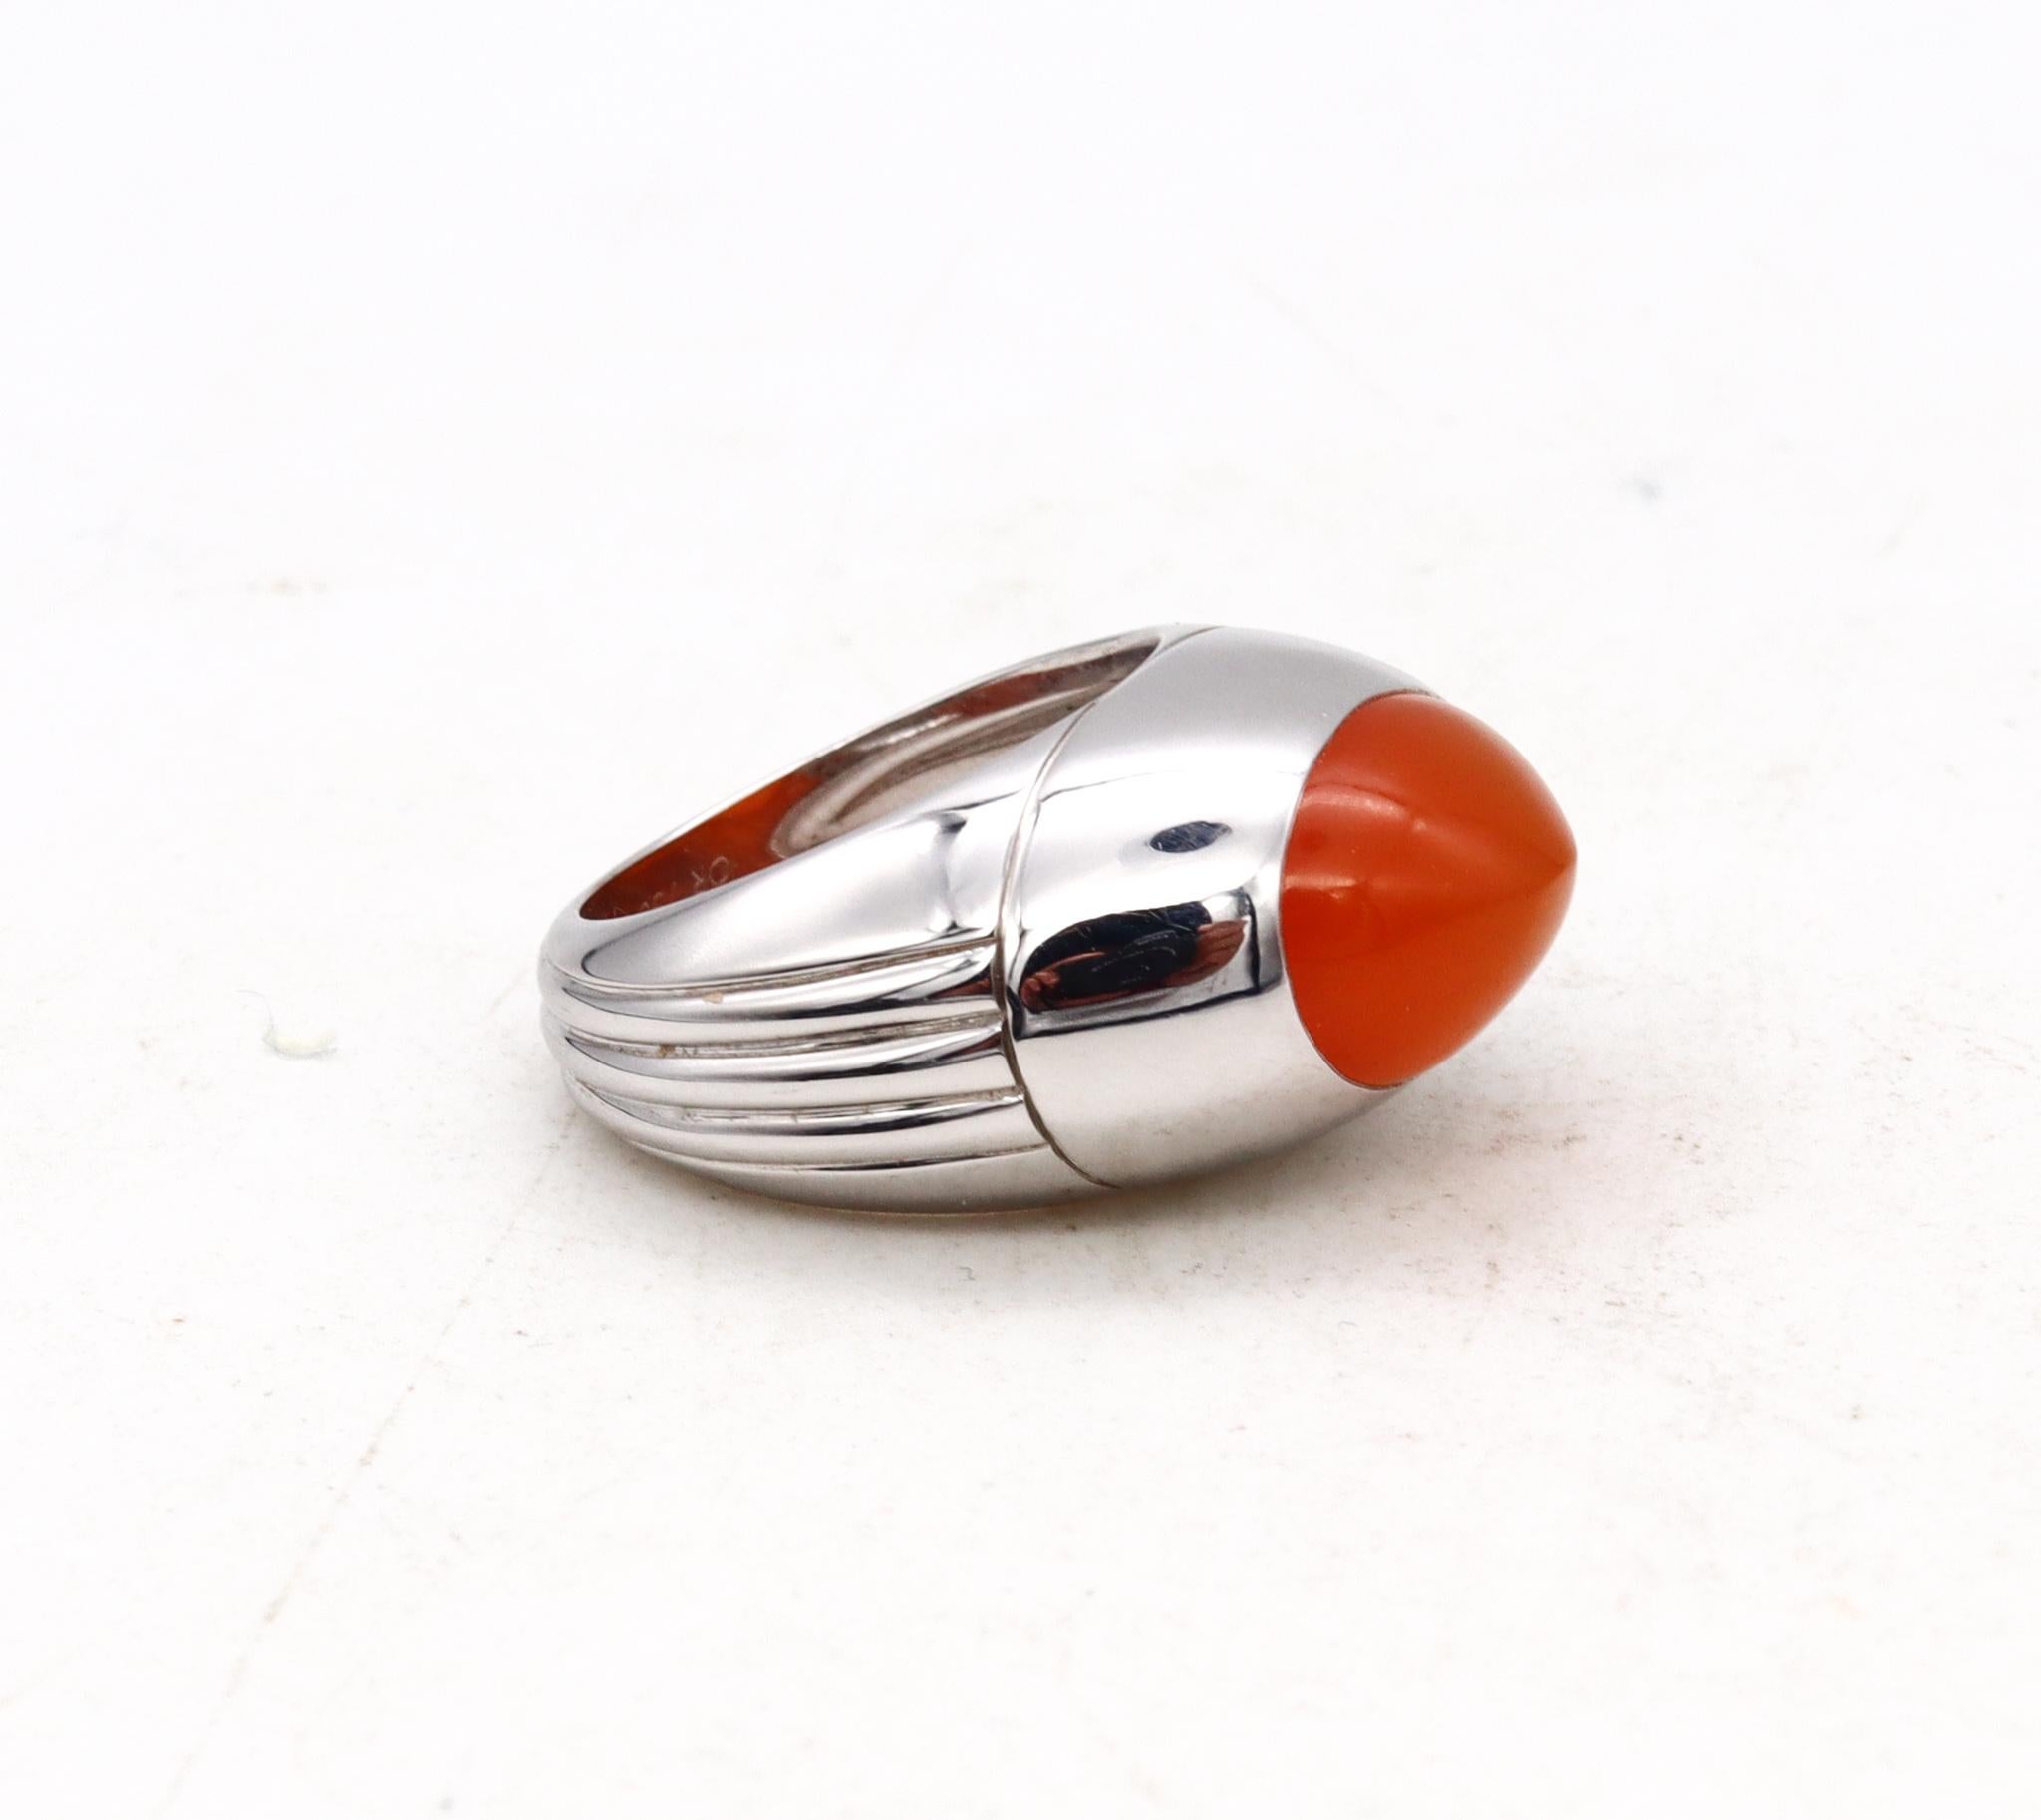 Boucheron Paris Dome Cocktail Ring 18Kt White Gold with Vivid Orangish Carnelian In Excellent Condition For Sale In Miami, FL